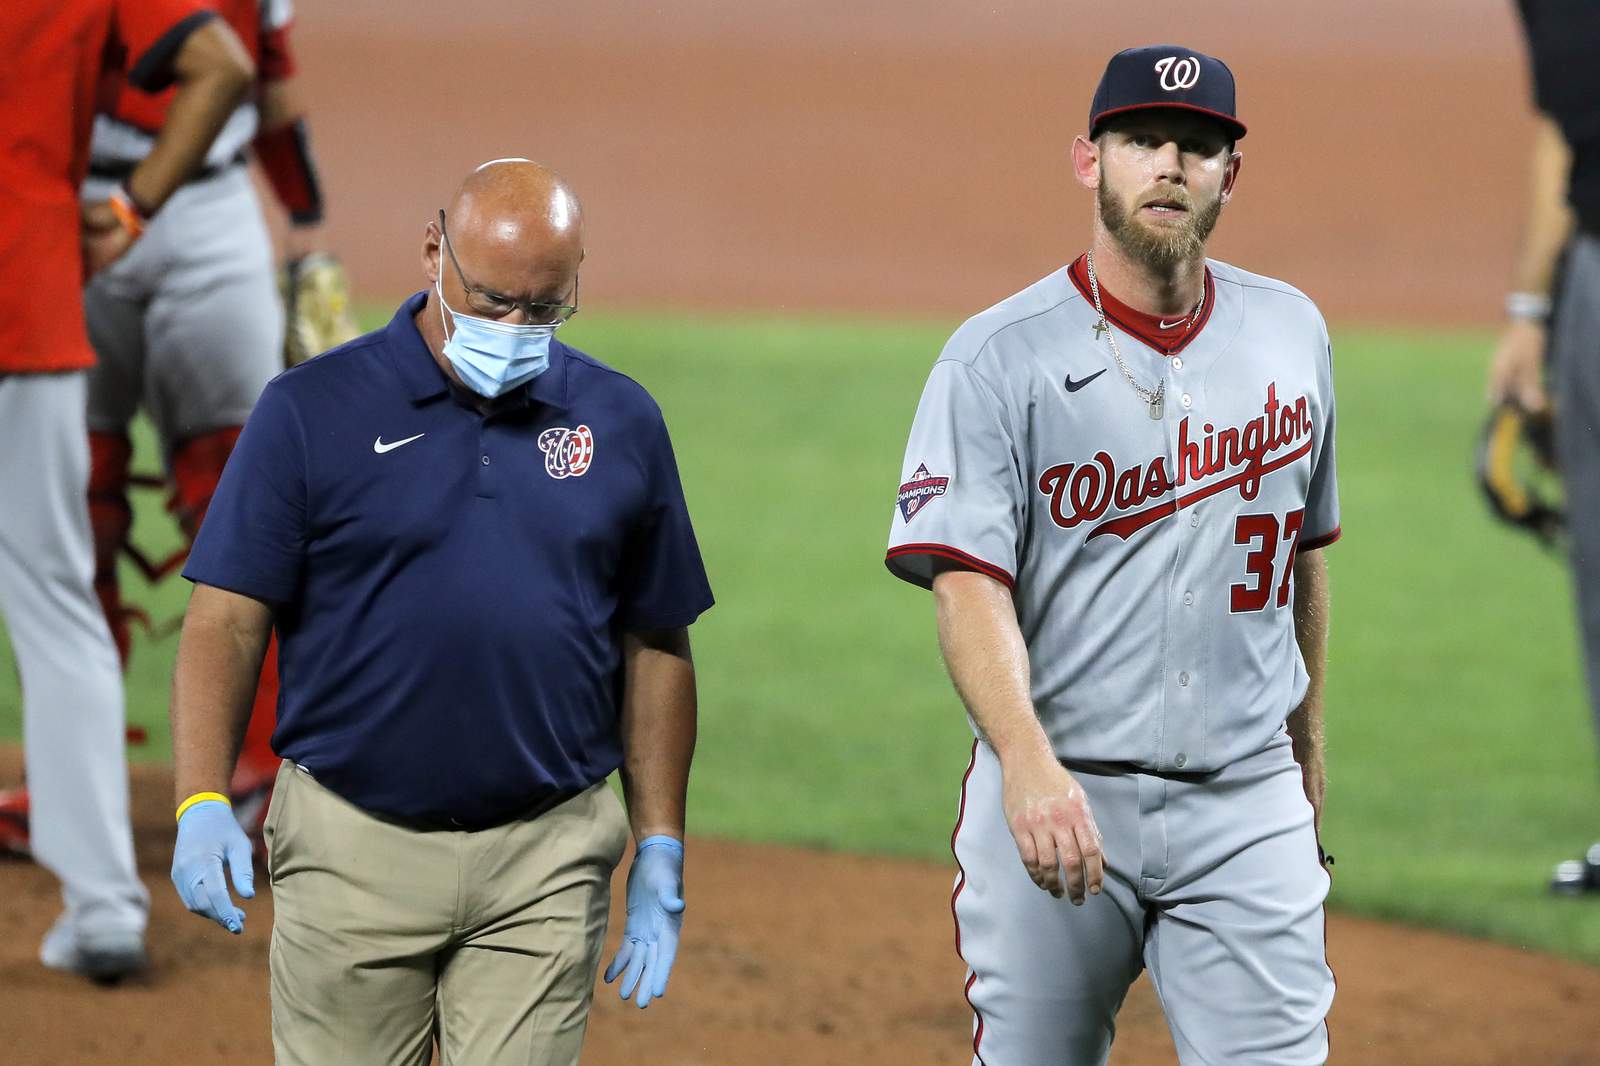 Nationals RHP Strasburg leaves with injury after 16 pitches